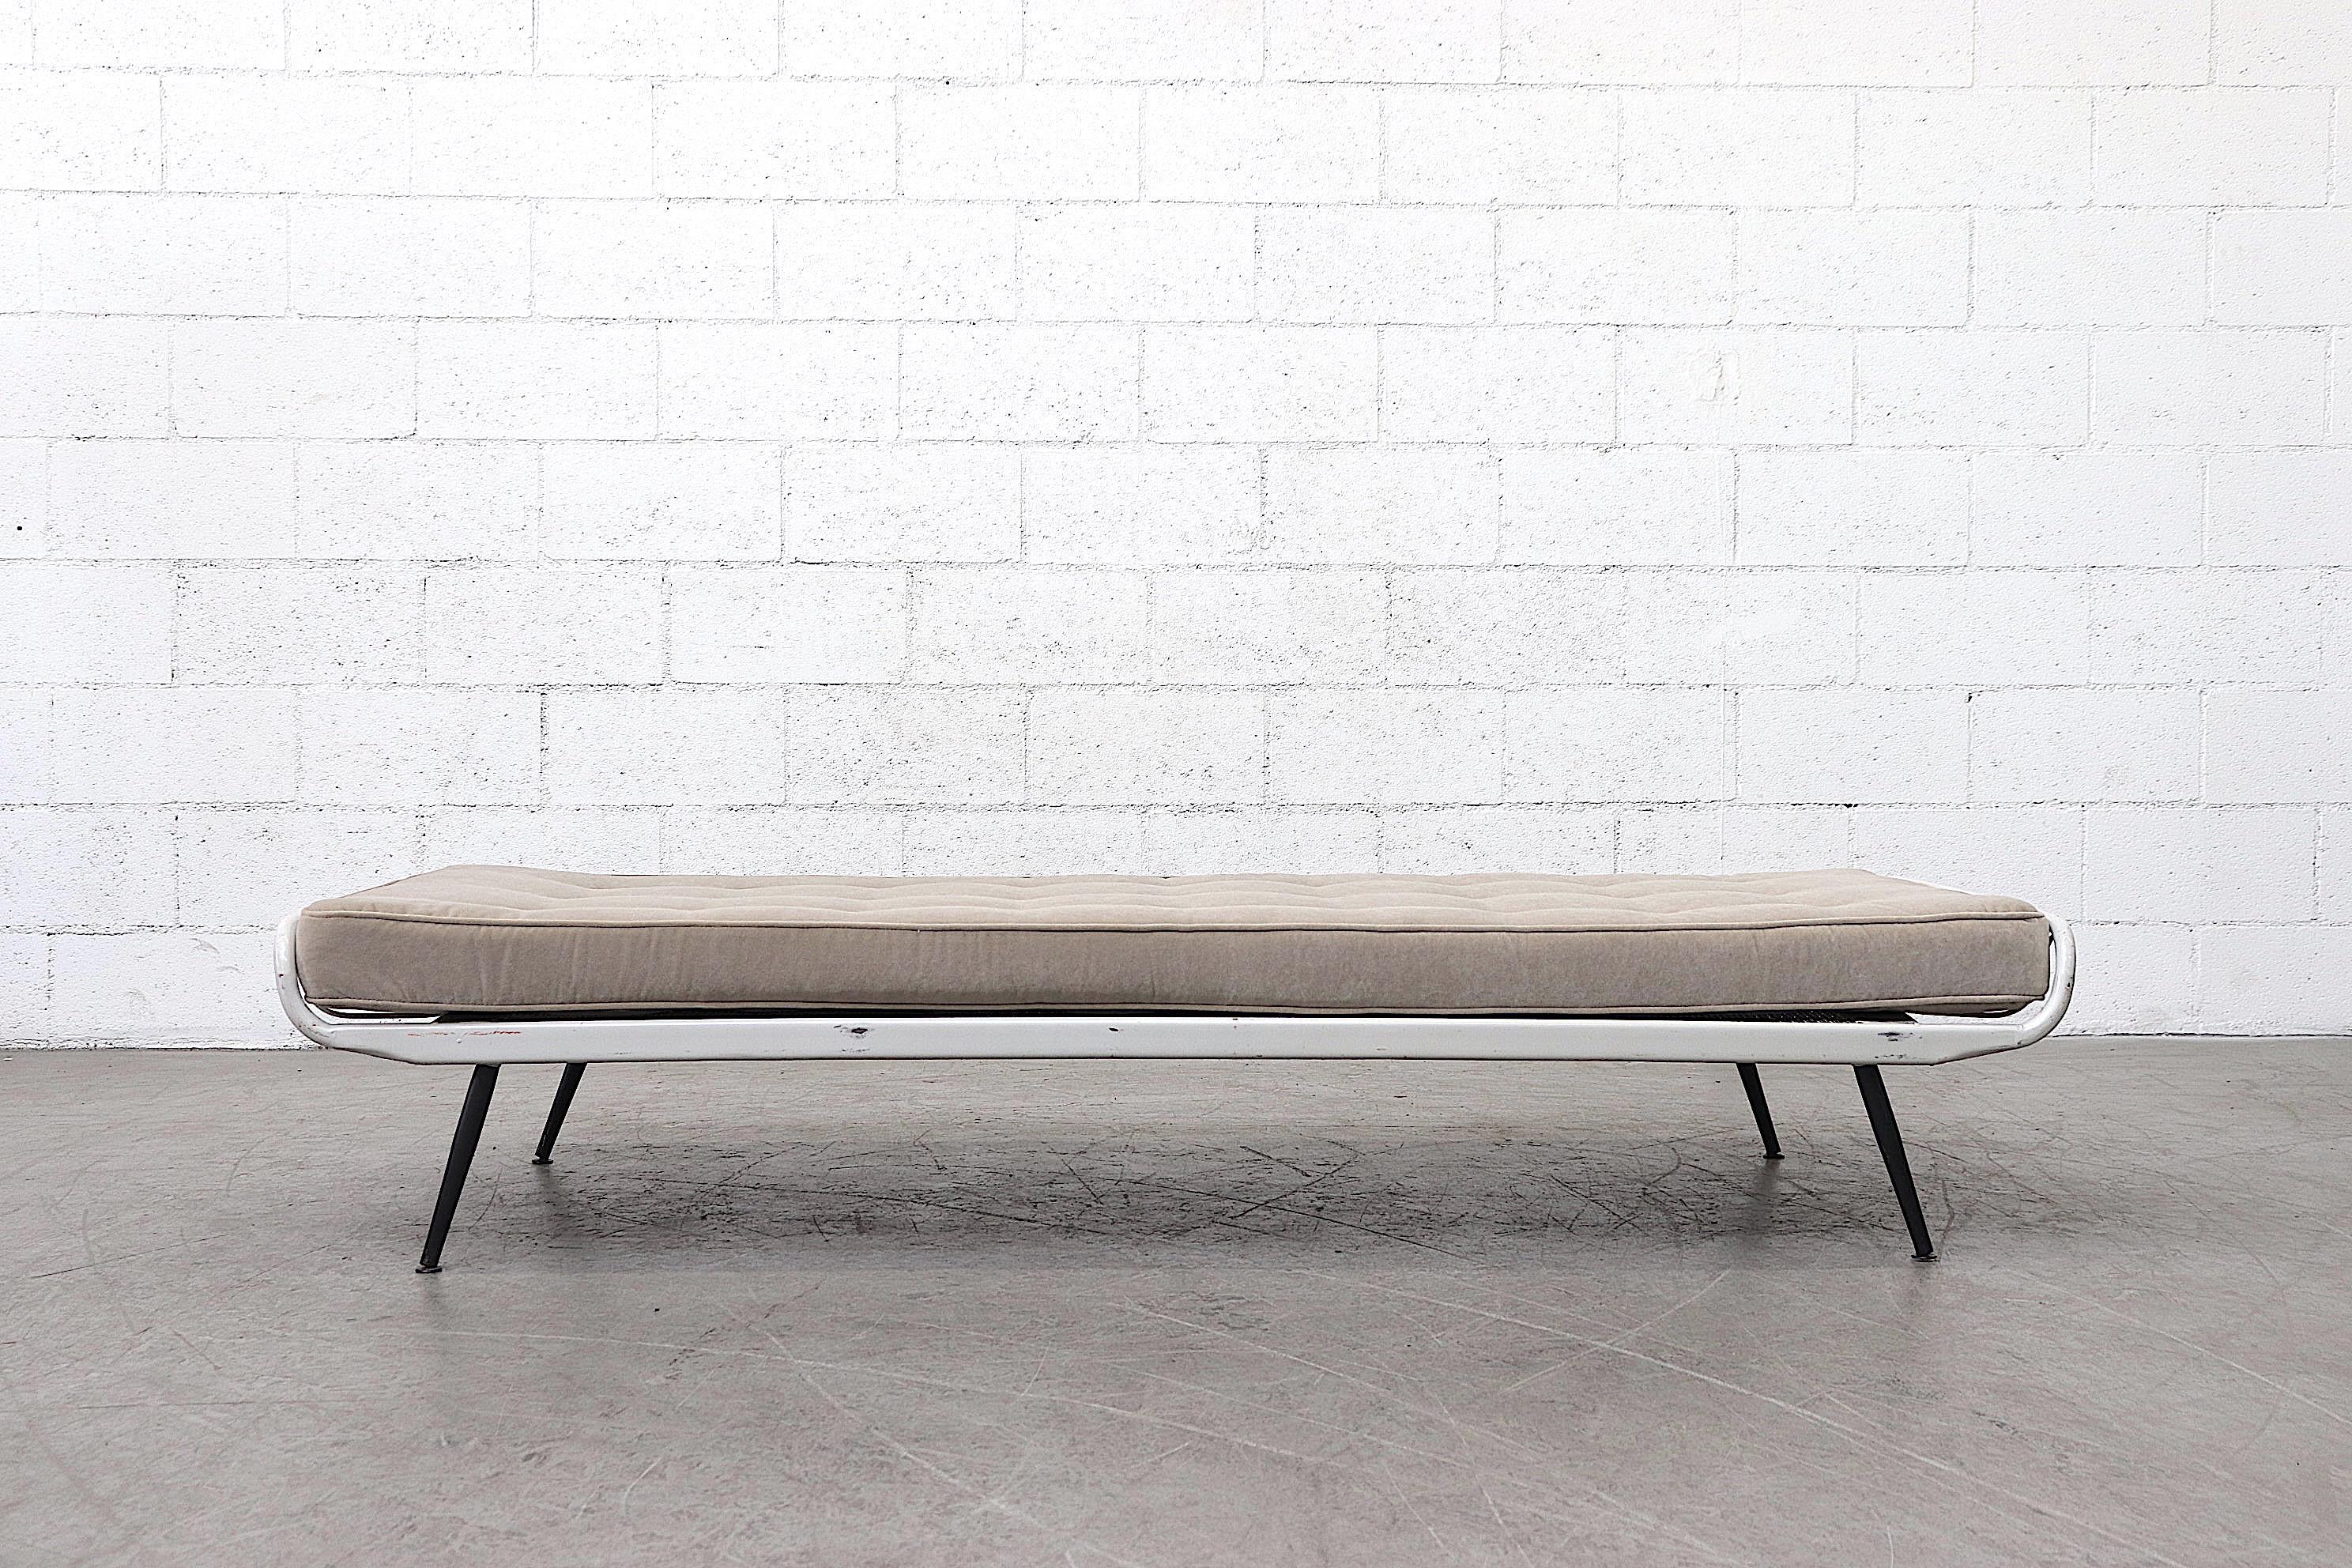 Surprisingly feminine institutional grey enameled metal daybed frame by Rawi Winschoten, 1950s. New dove grey velvet mattress. Frame in original condition with wear consistent with its age and usage.